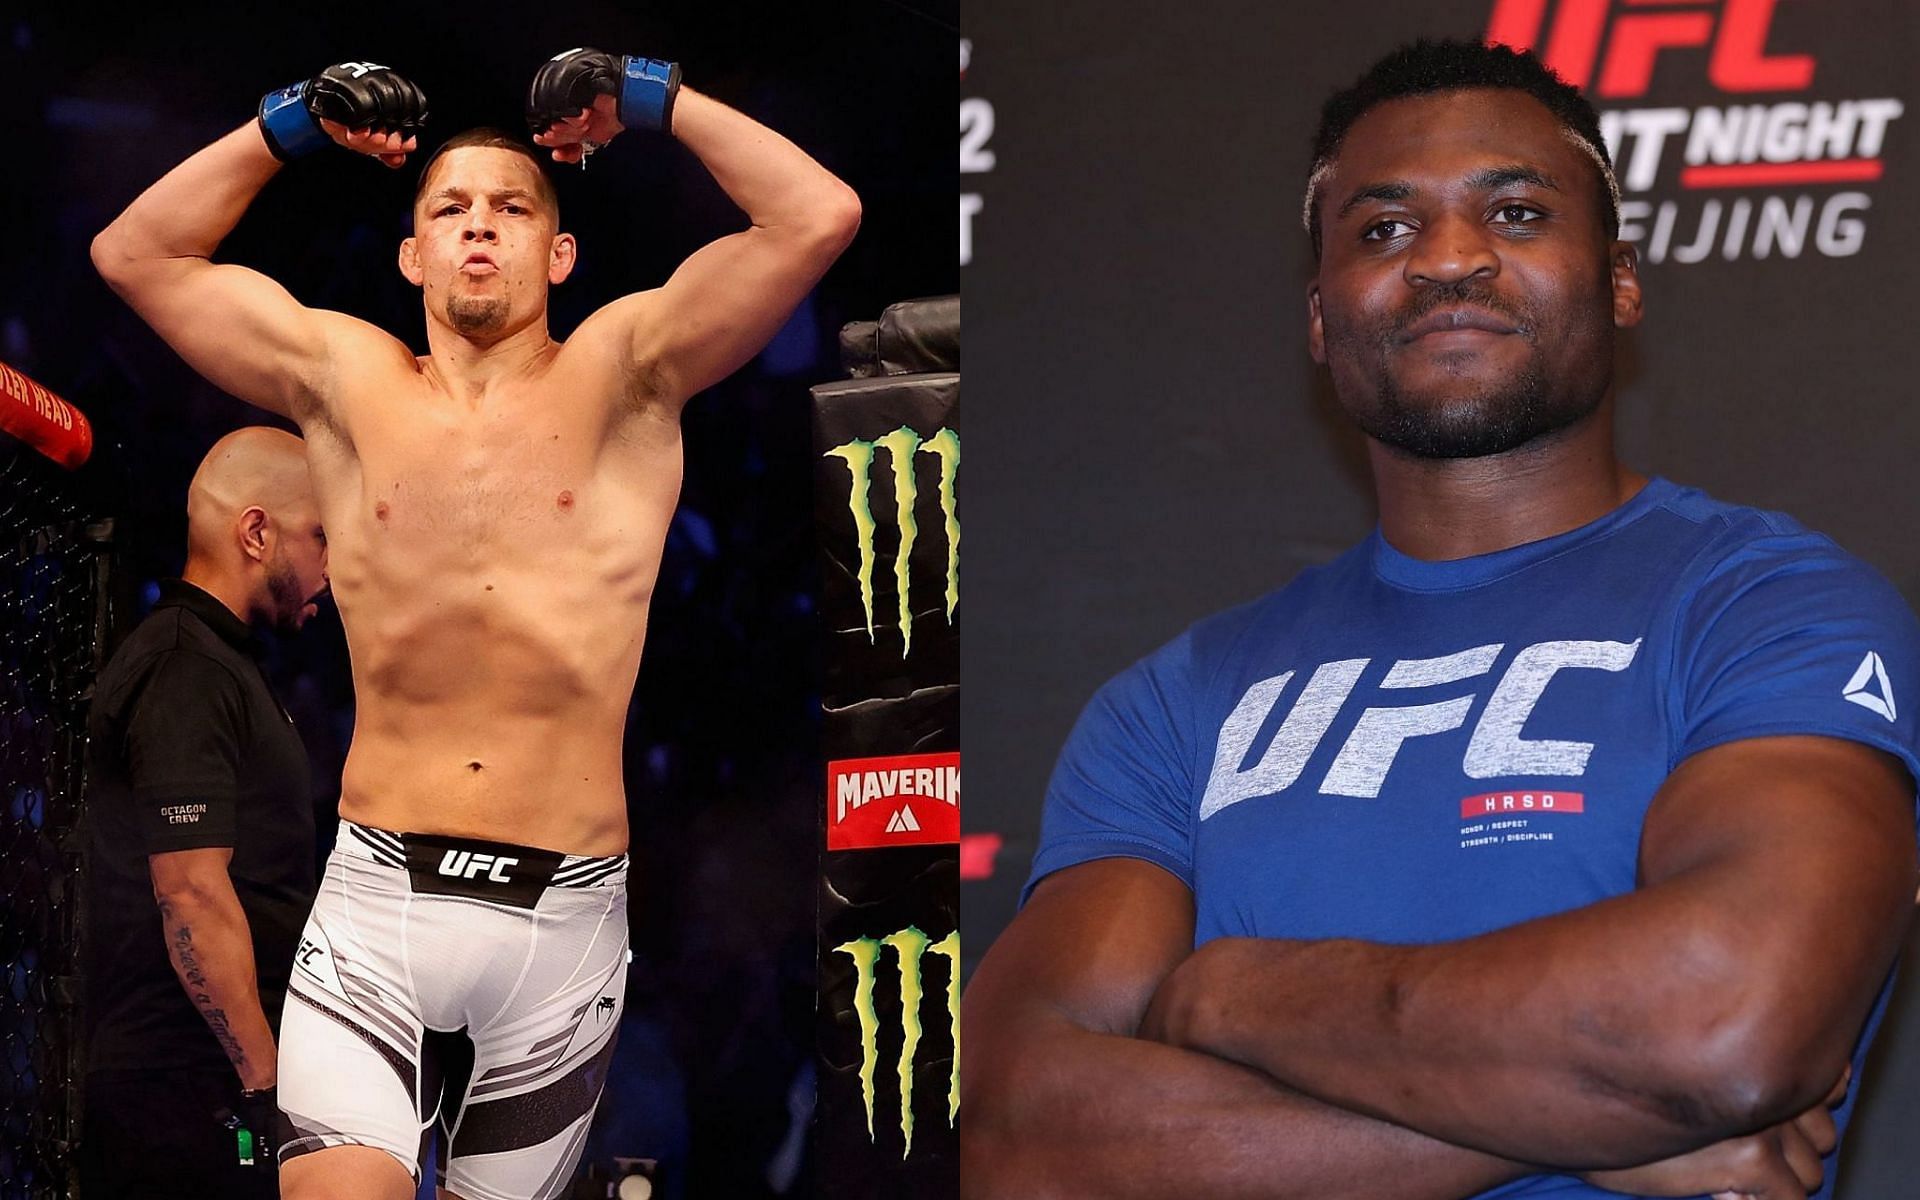 Nate Diaz (left) and Francis Ngannou (right)